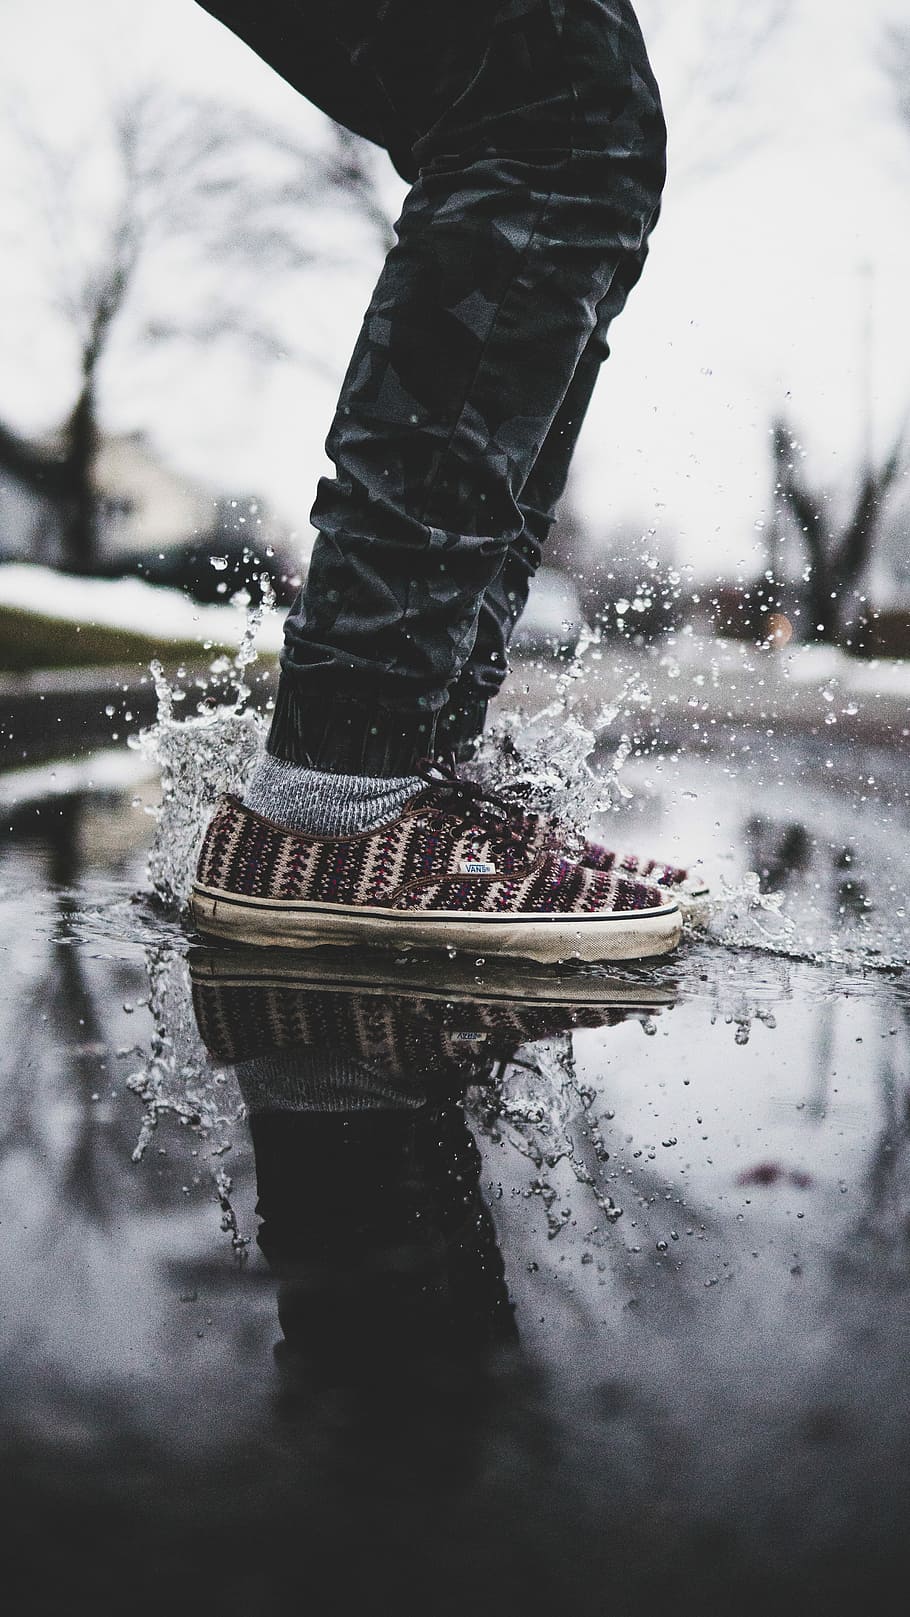 person wearing black pants and black-and-white low-top sneakers on wet floor, person splashing the water under white cloudy sky photo, HD wallpaper